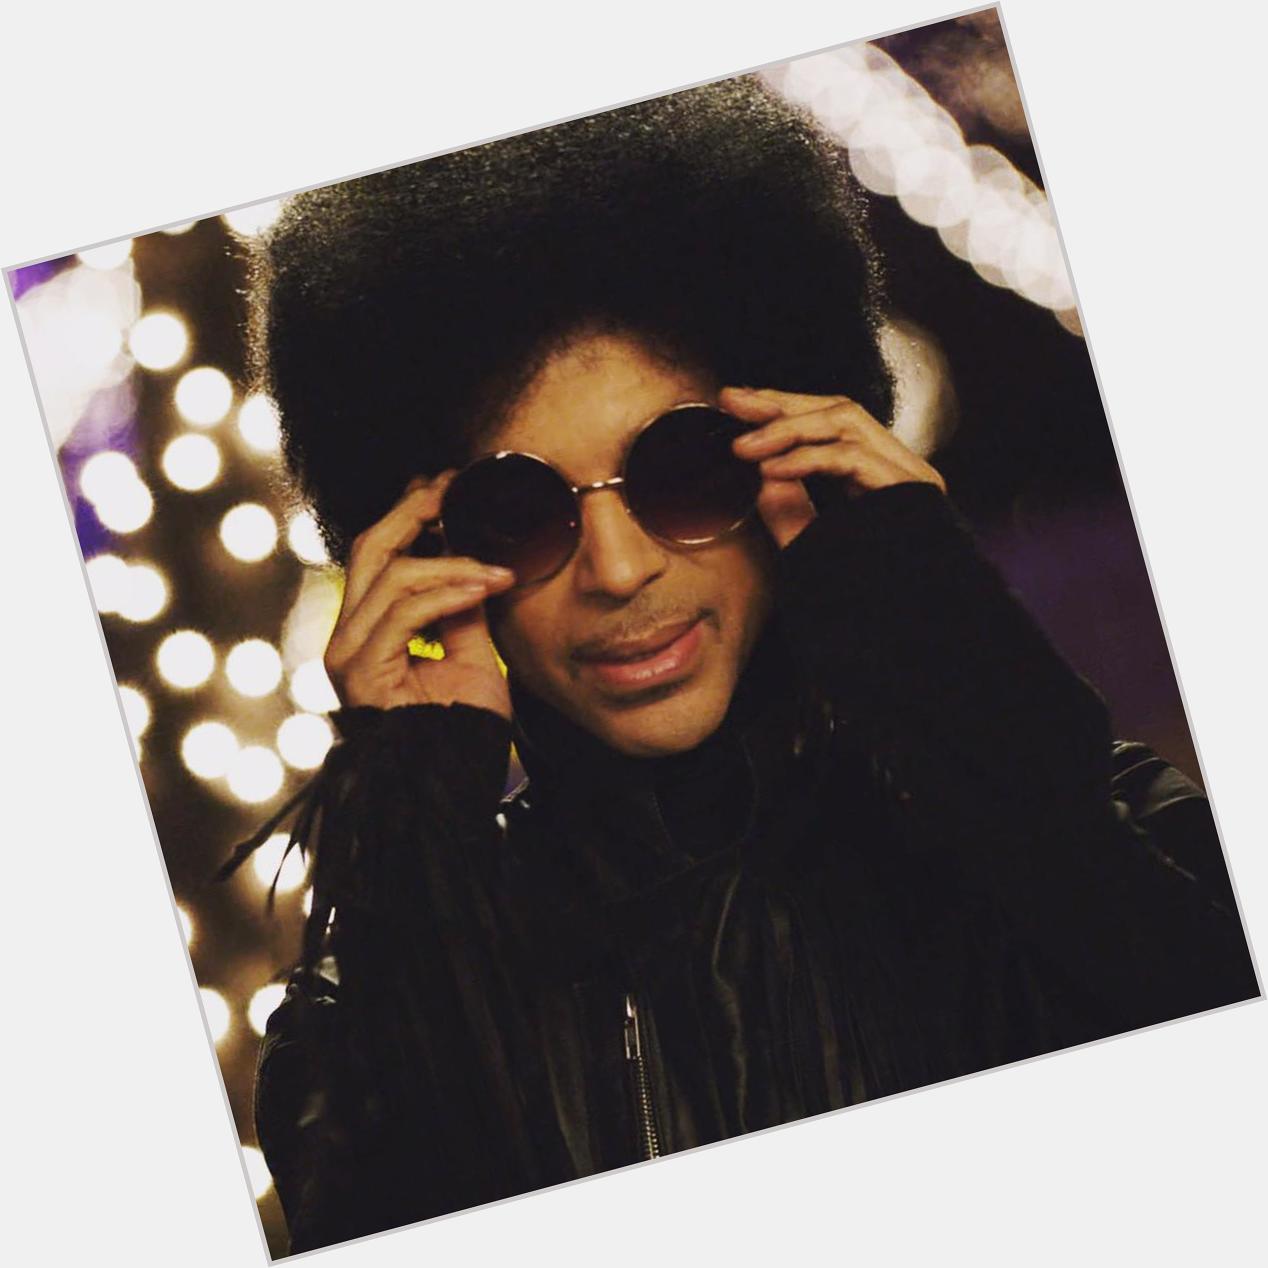 Happy birthday to the greatest artist there ever was, Prince. Hopefully I\ll be half as cool as you one day 